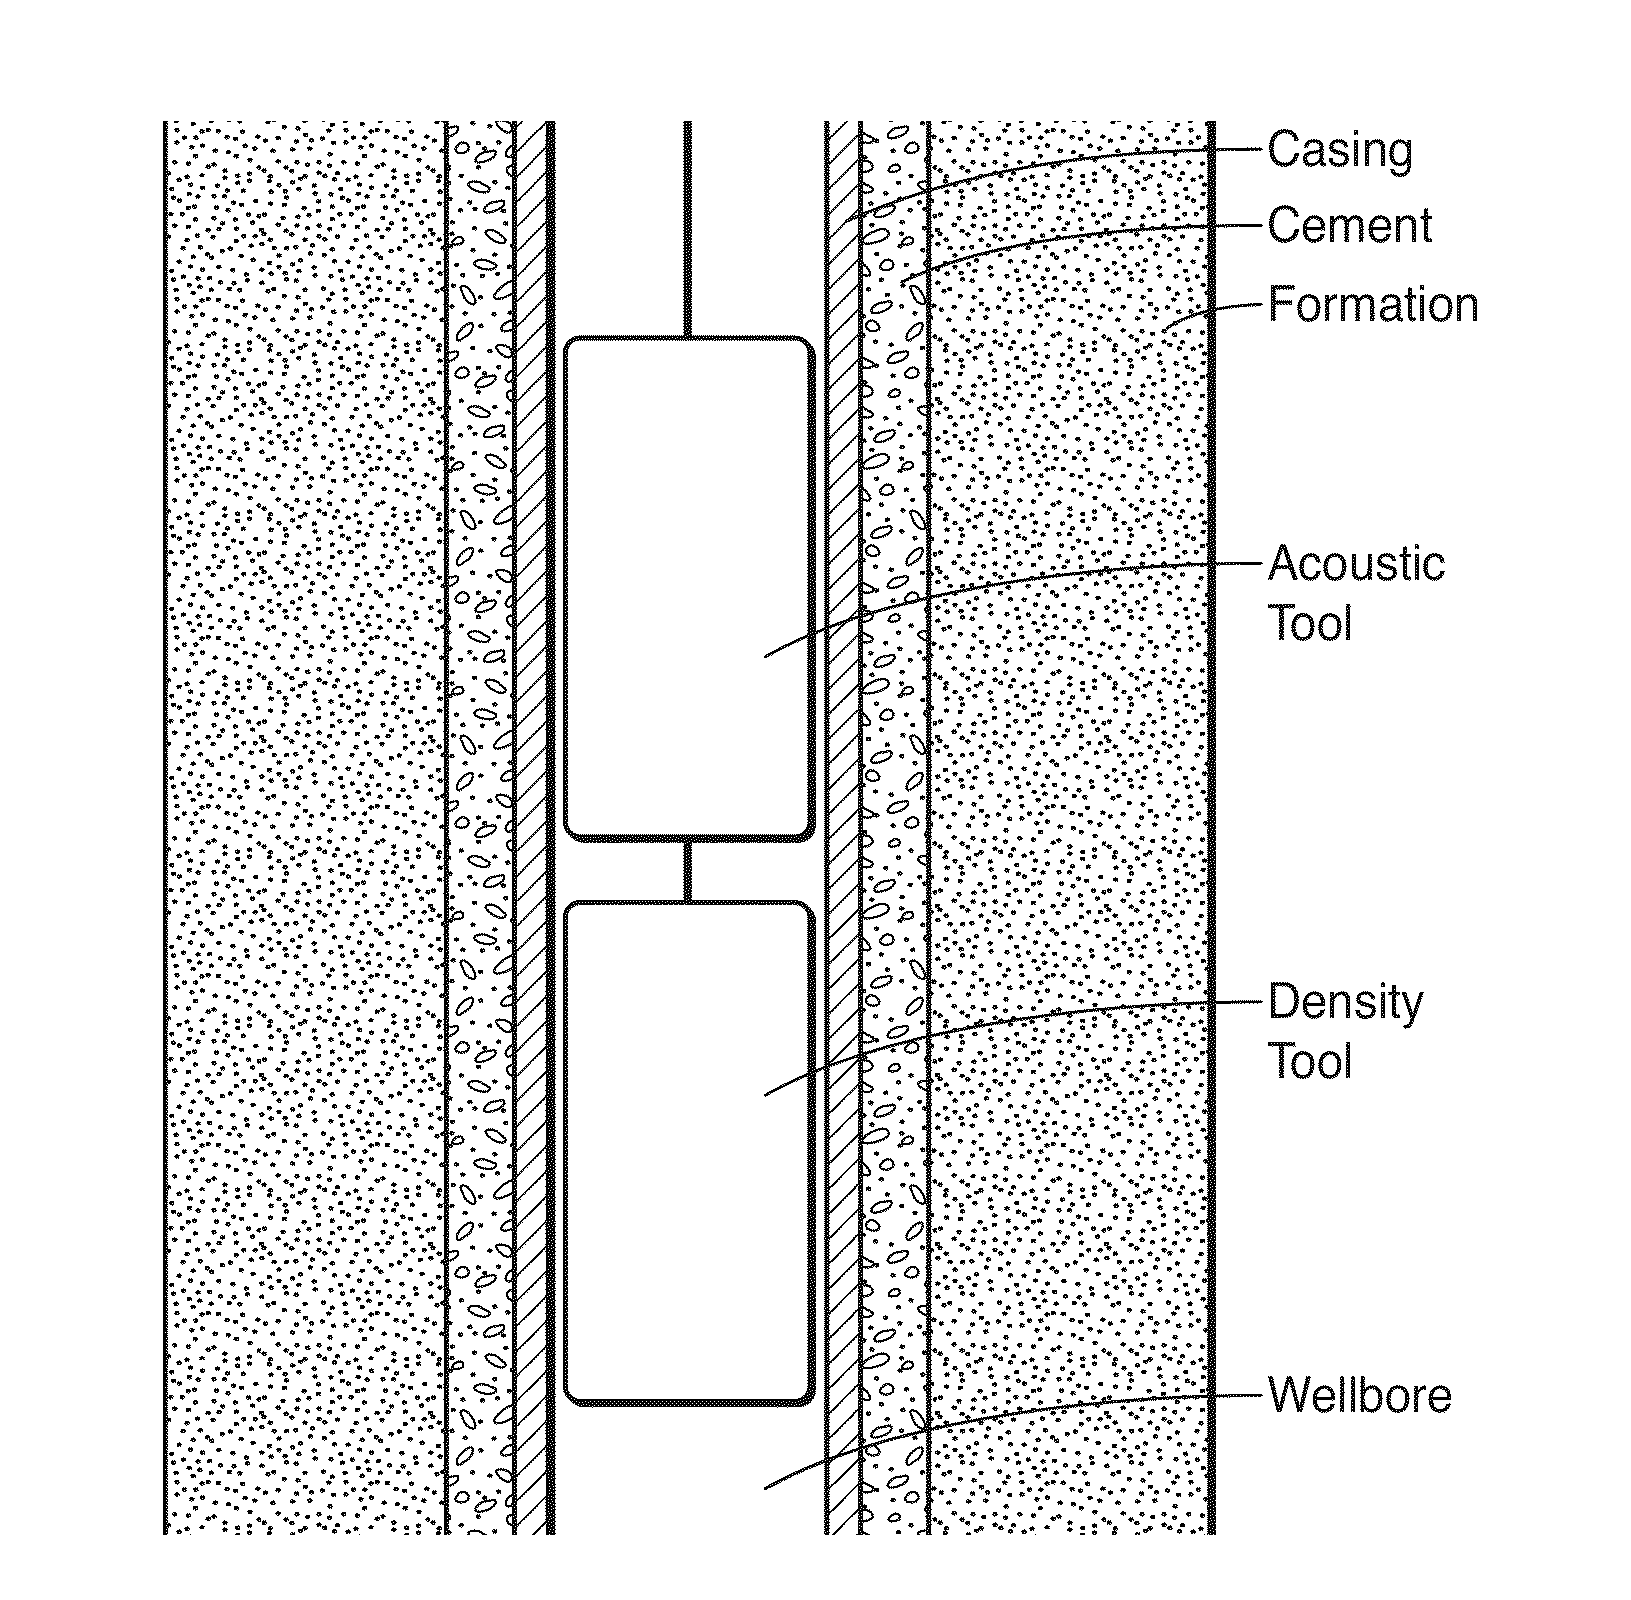 Method for Cement Evaluation with Acoustic and Nuclear Density Logs